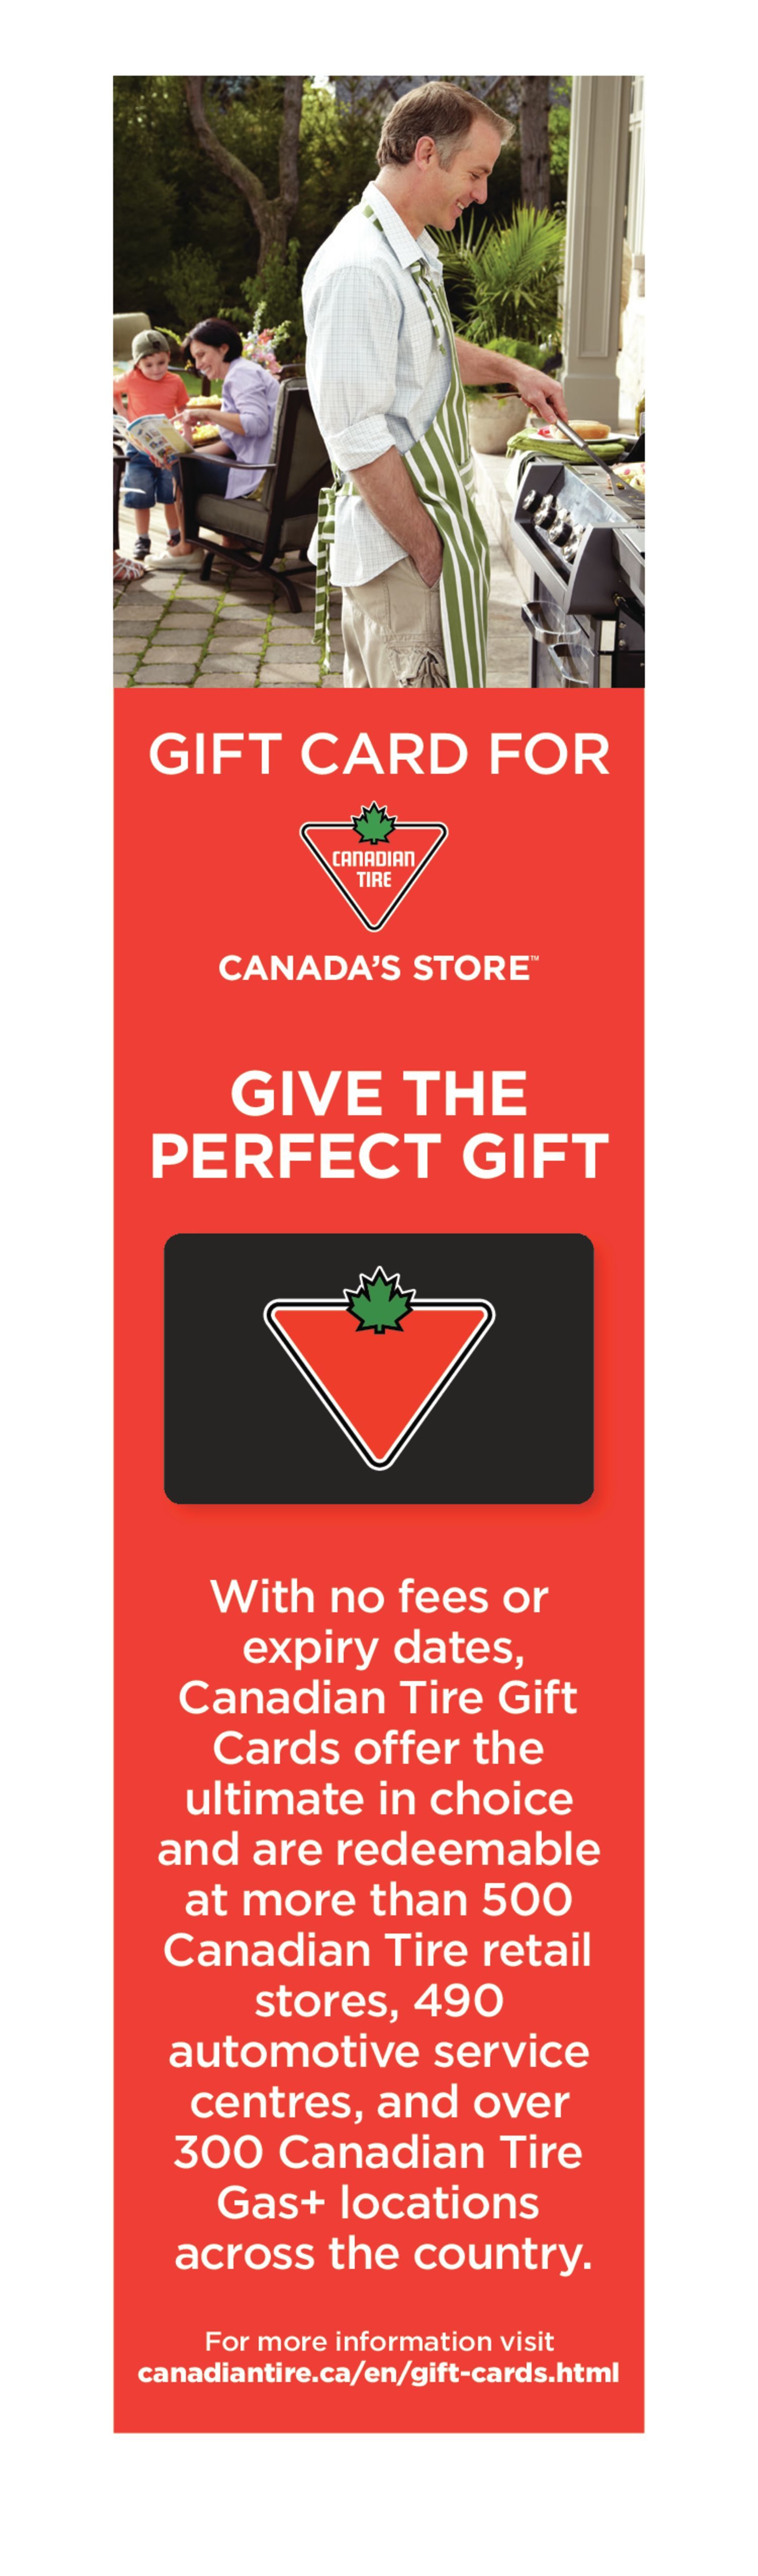 Canadian Tire Weekly Flyer - Weekly 